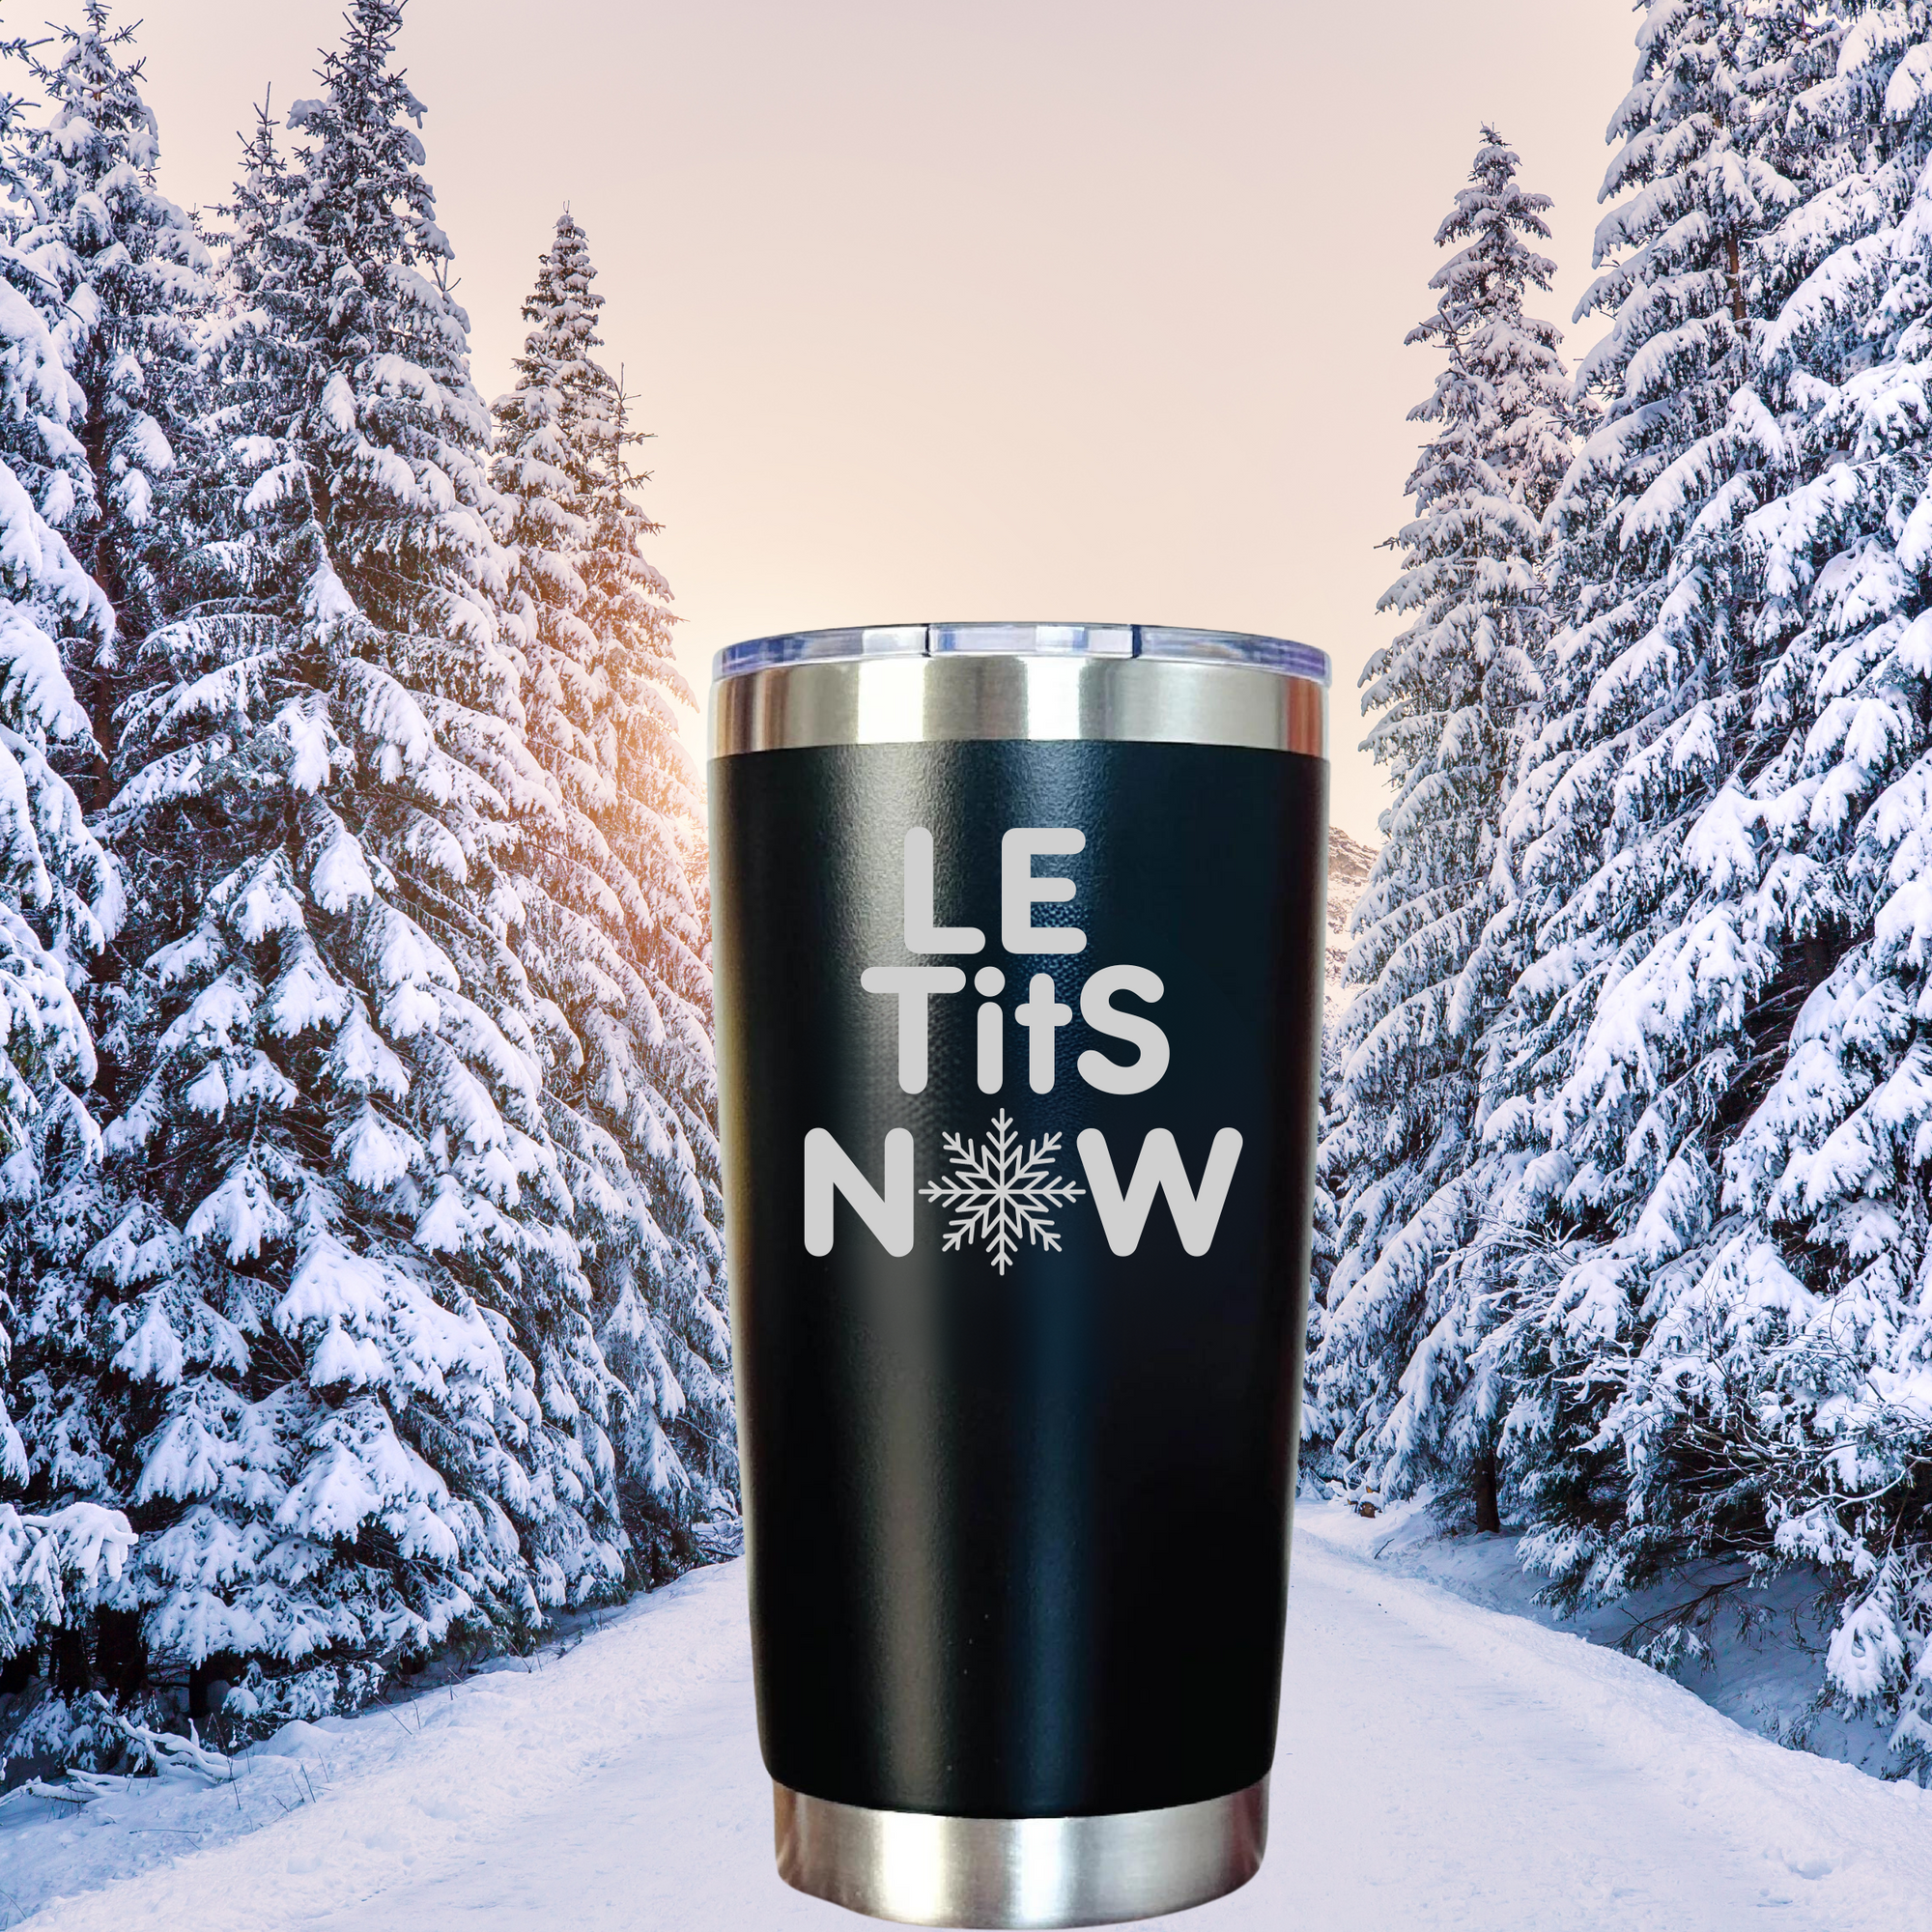 Yeti Is Offering Free Tumbler and Bottle Customization for Holiday